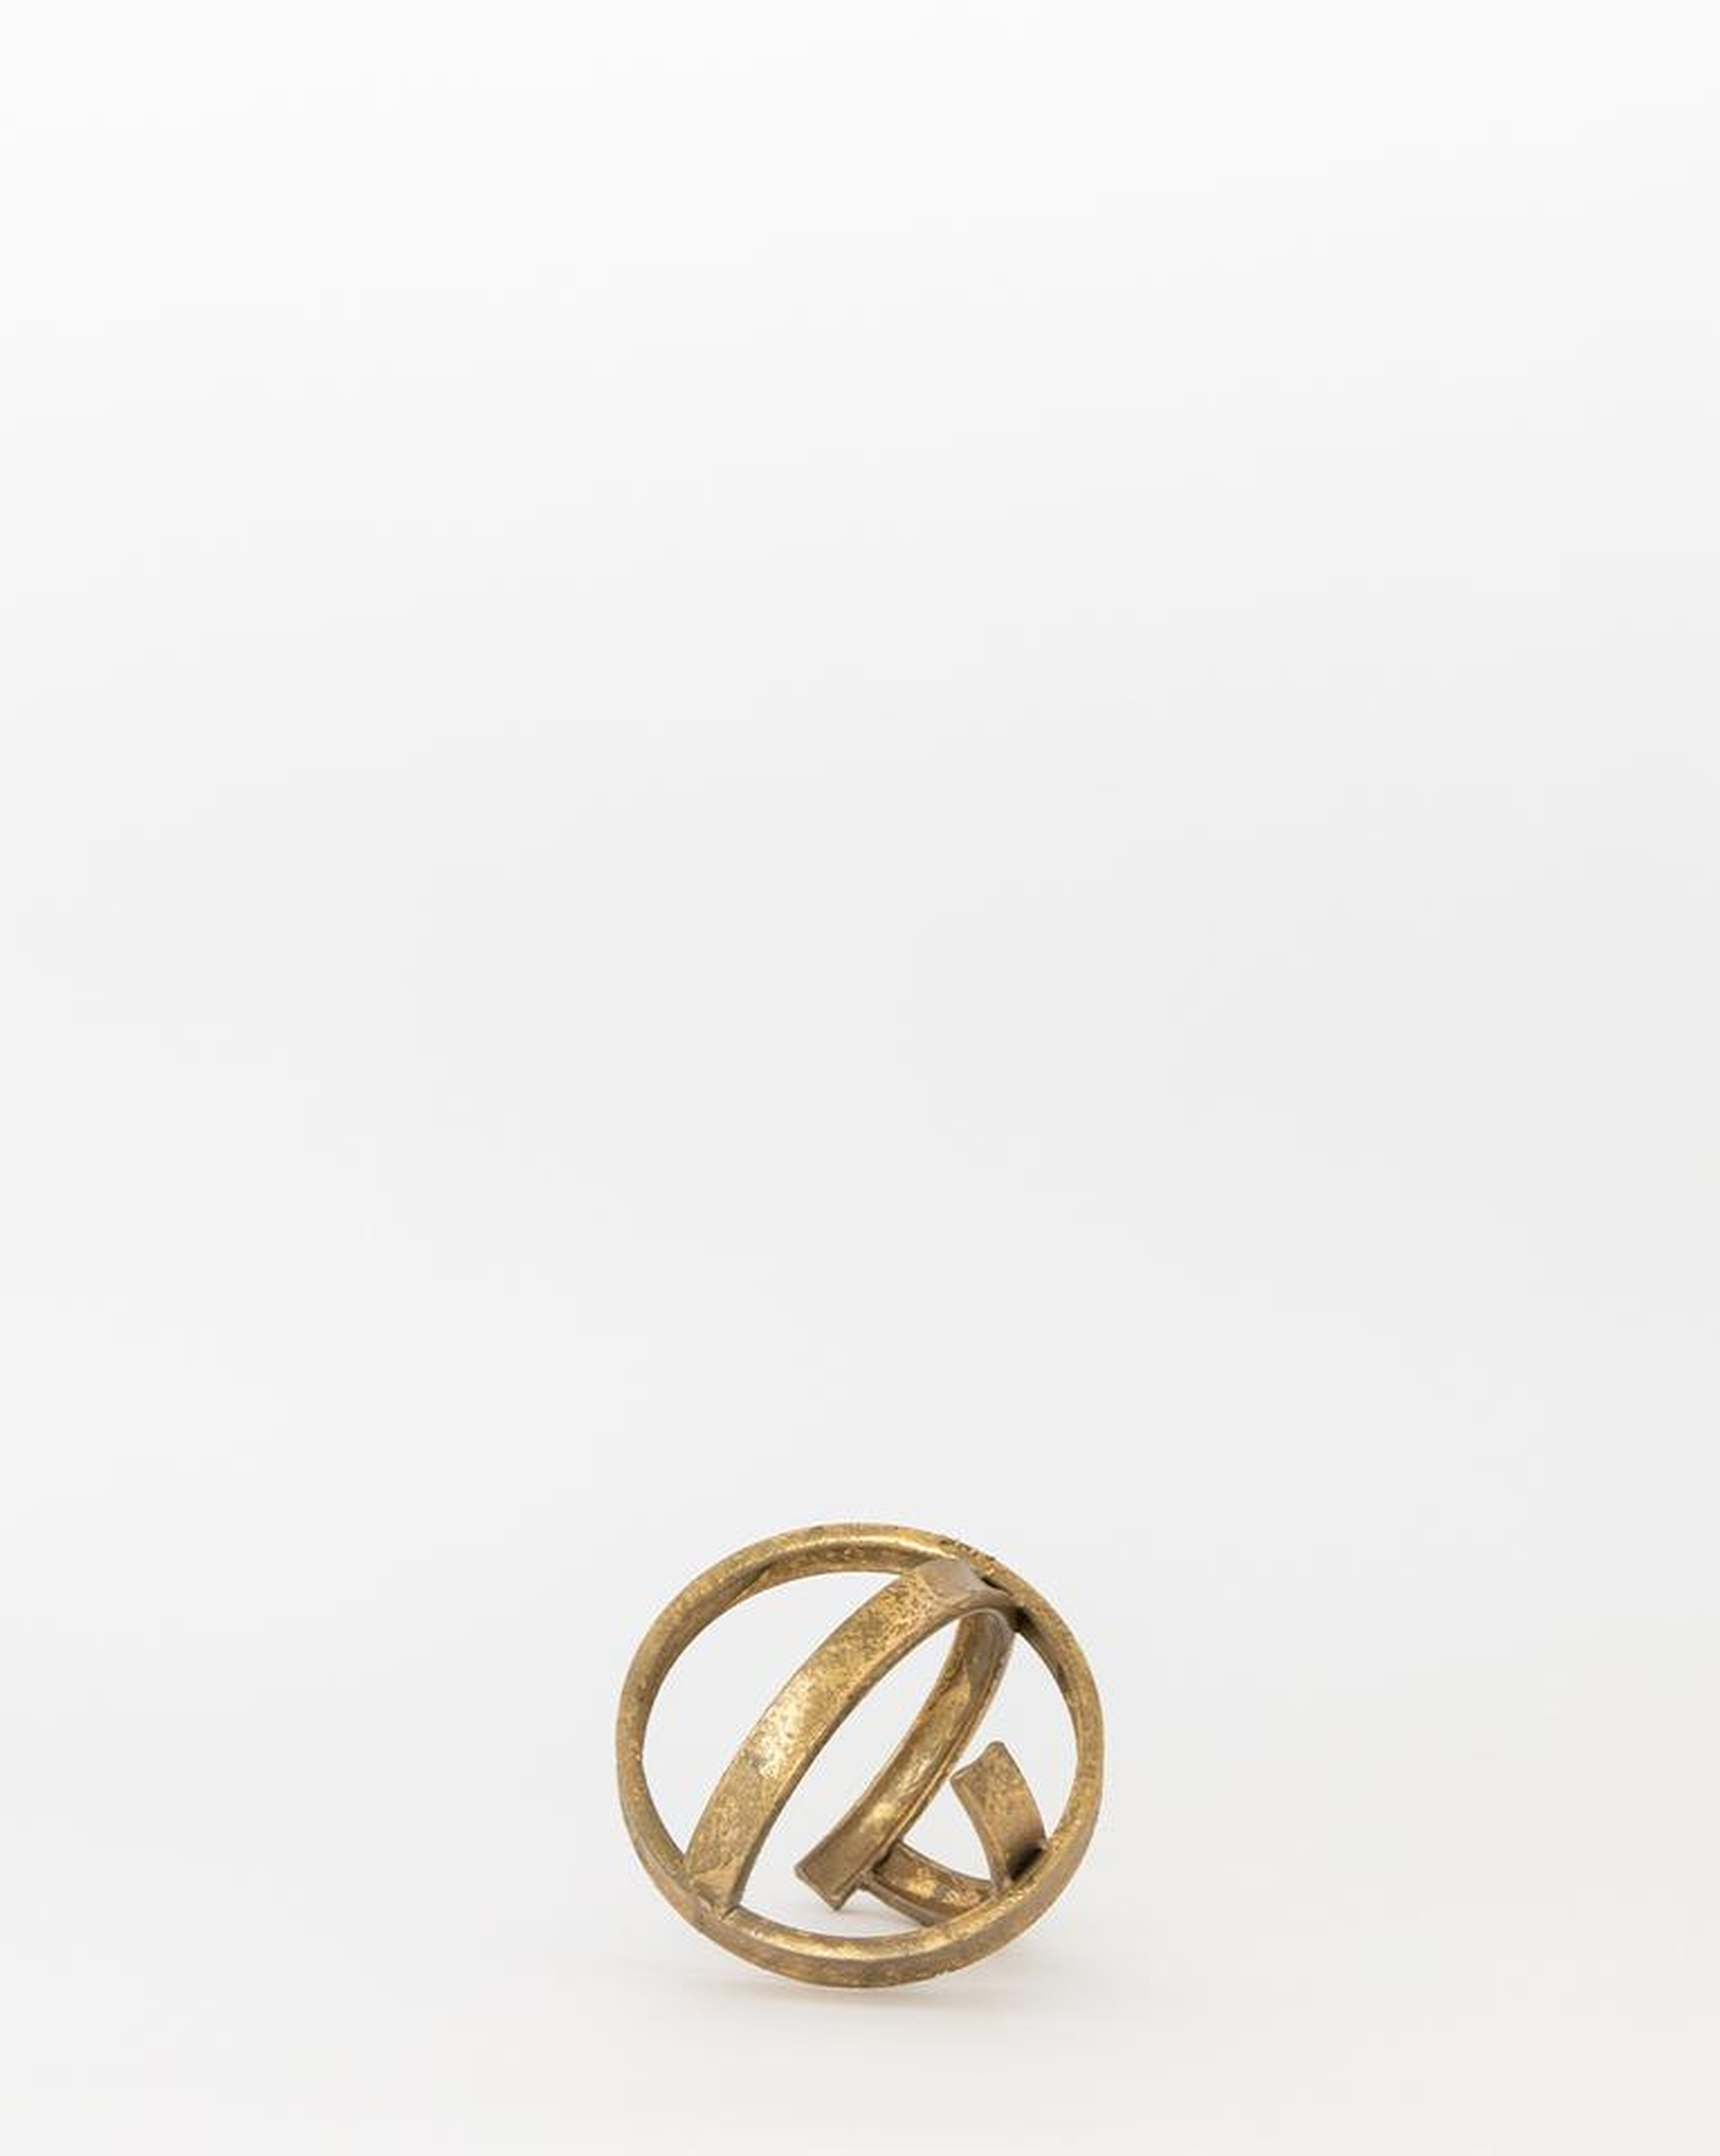 BRASS RINGS OBJECT, Small - McGee & Co.